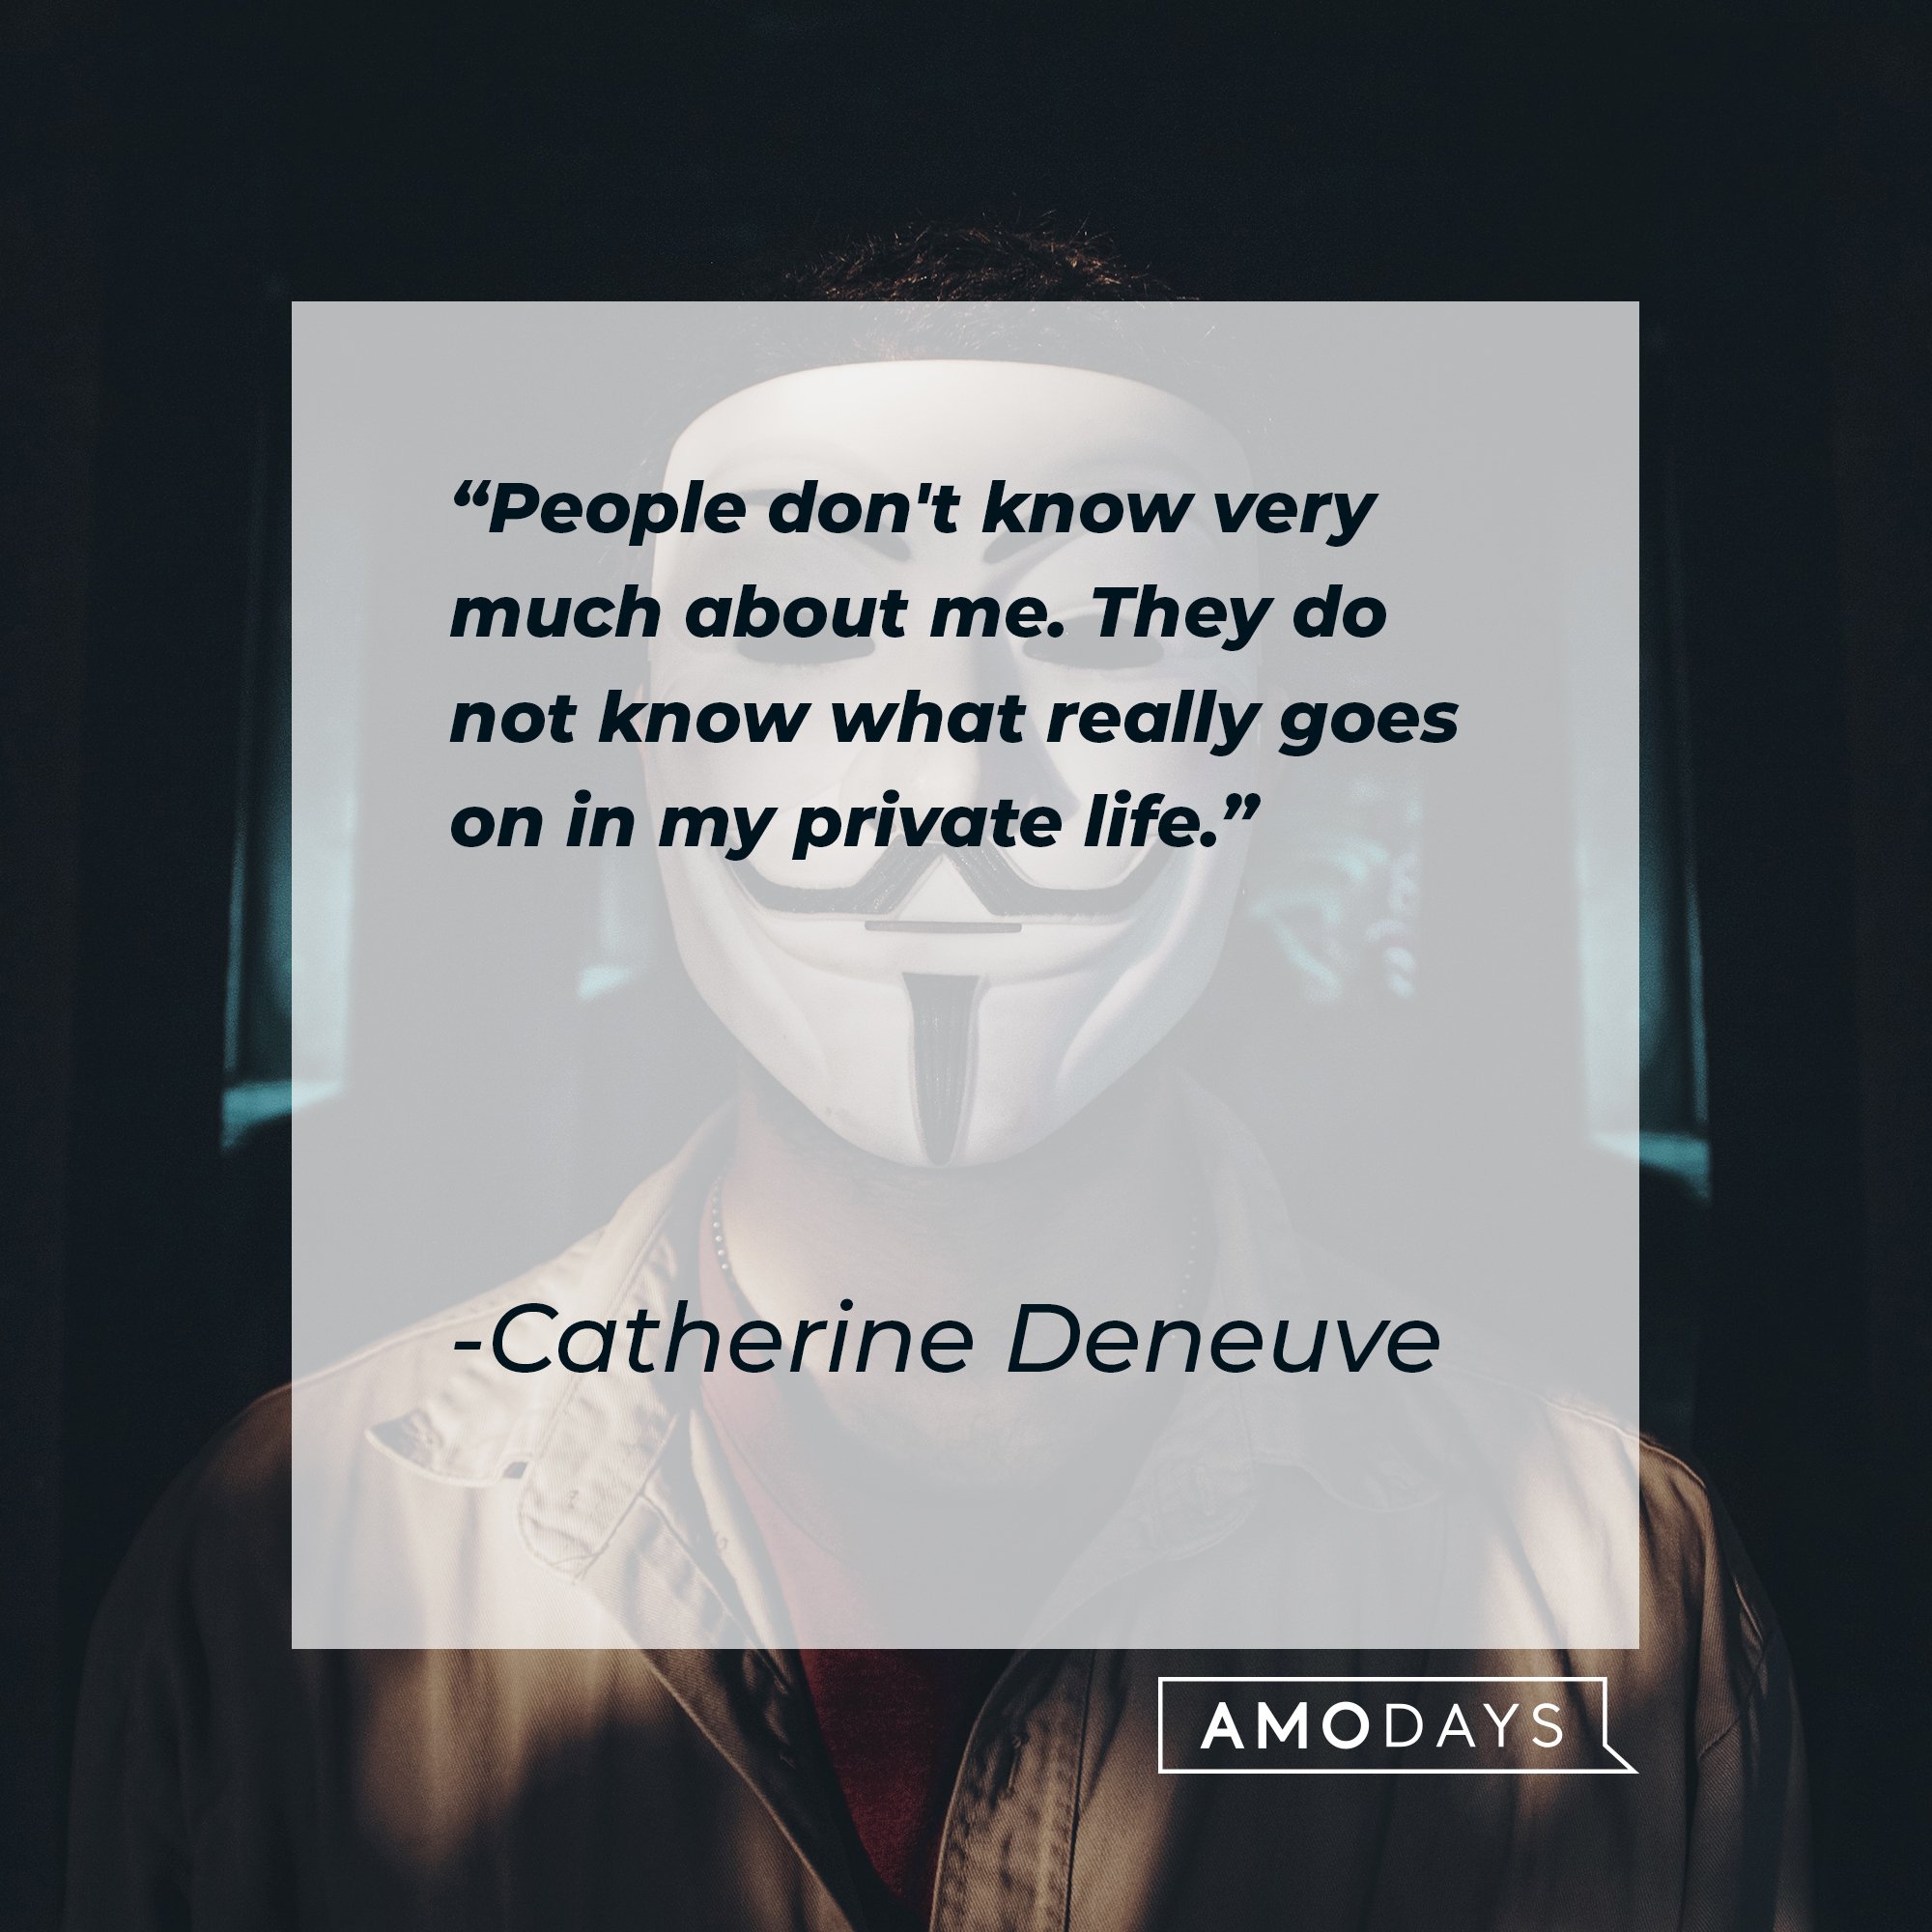 Catherine Deneuve’s quote: "People don't know very much about me. They do not know what really goes on in my private life." | Image: AmoDays  